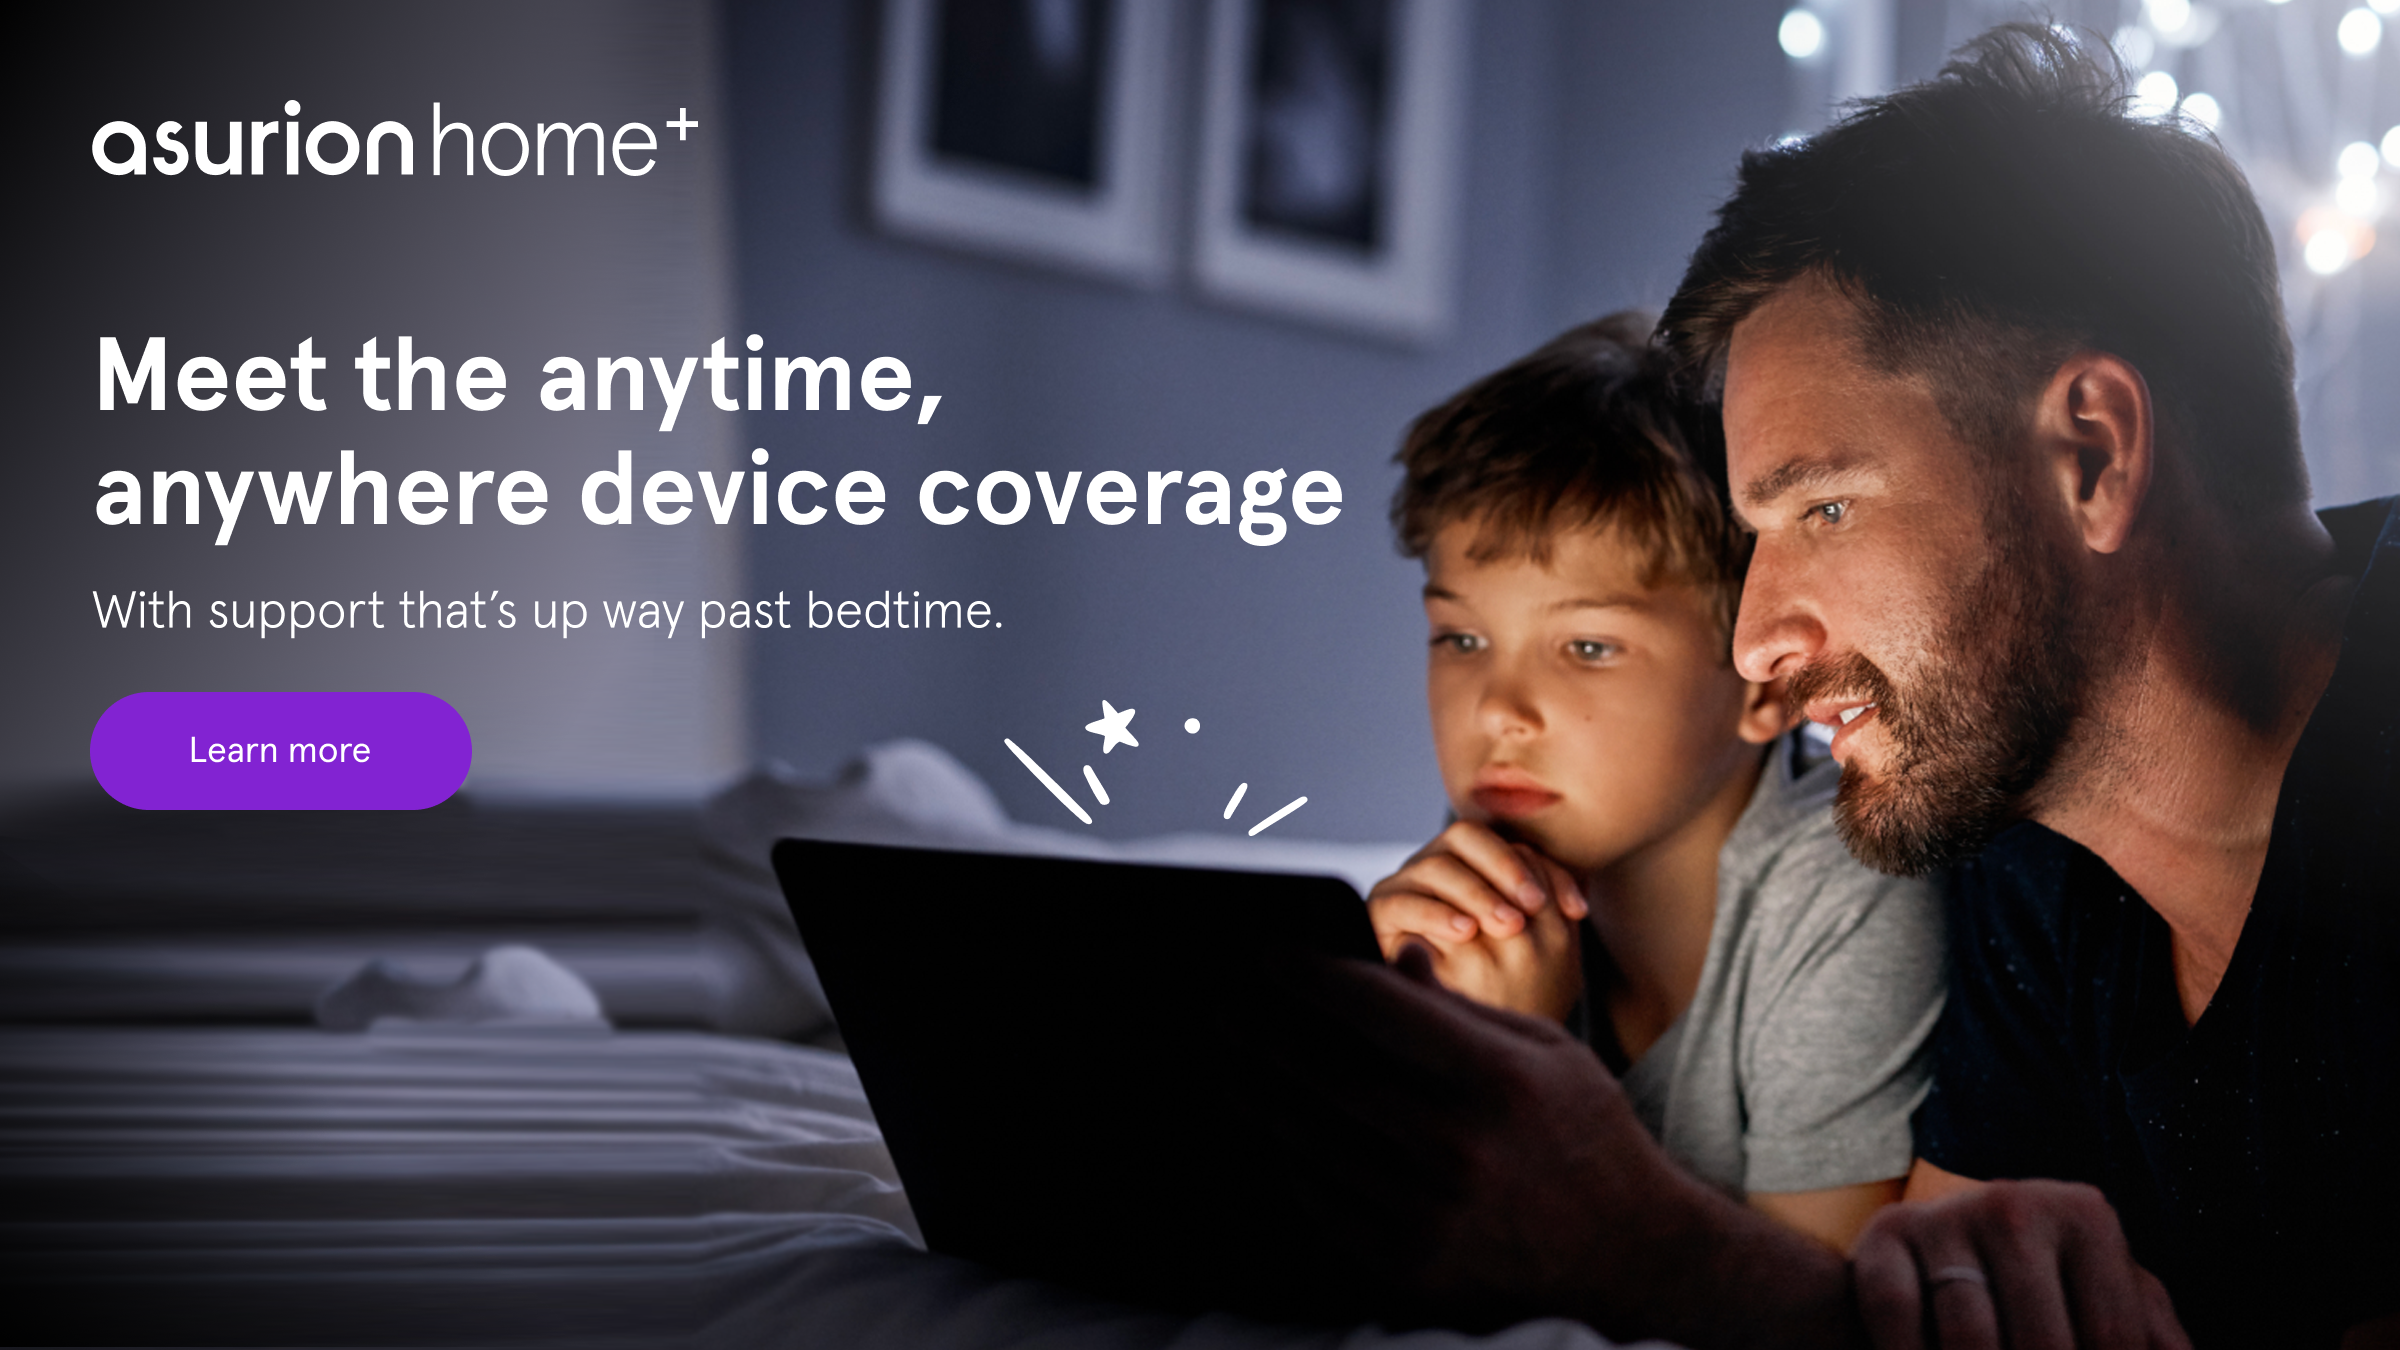 Asurion Home+ Makes Tech Support Easy, Convenient, & Affordable on All of Your Devices